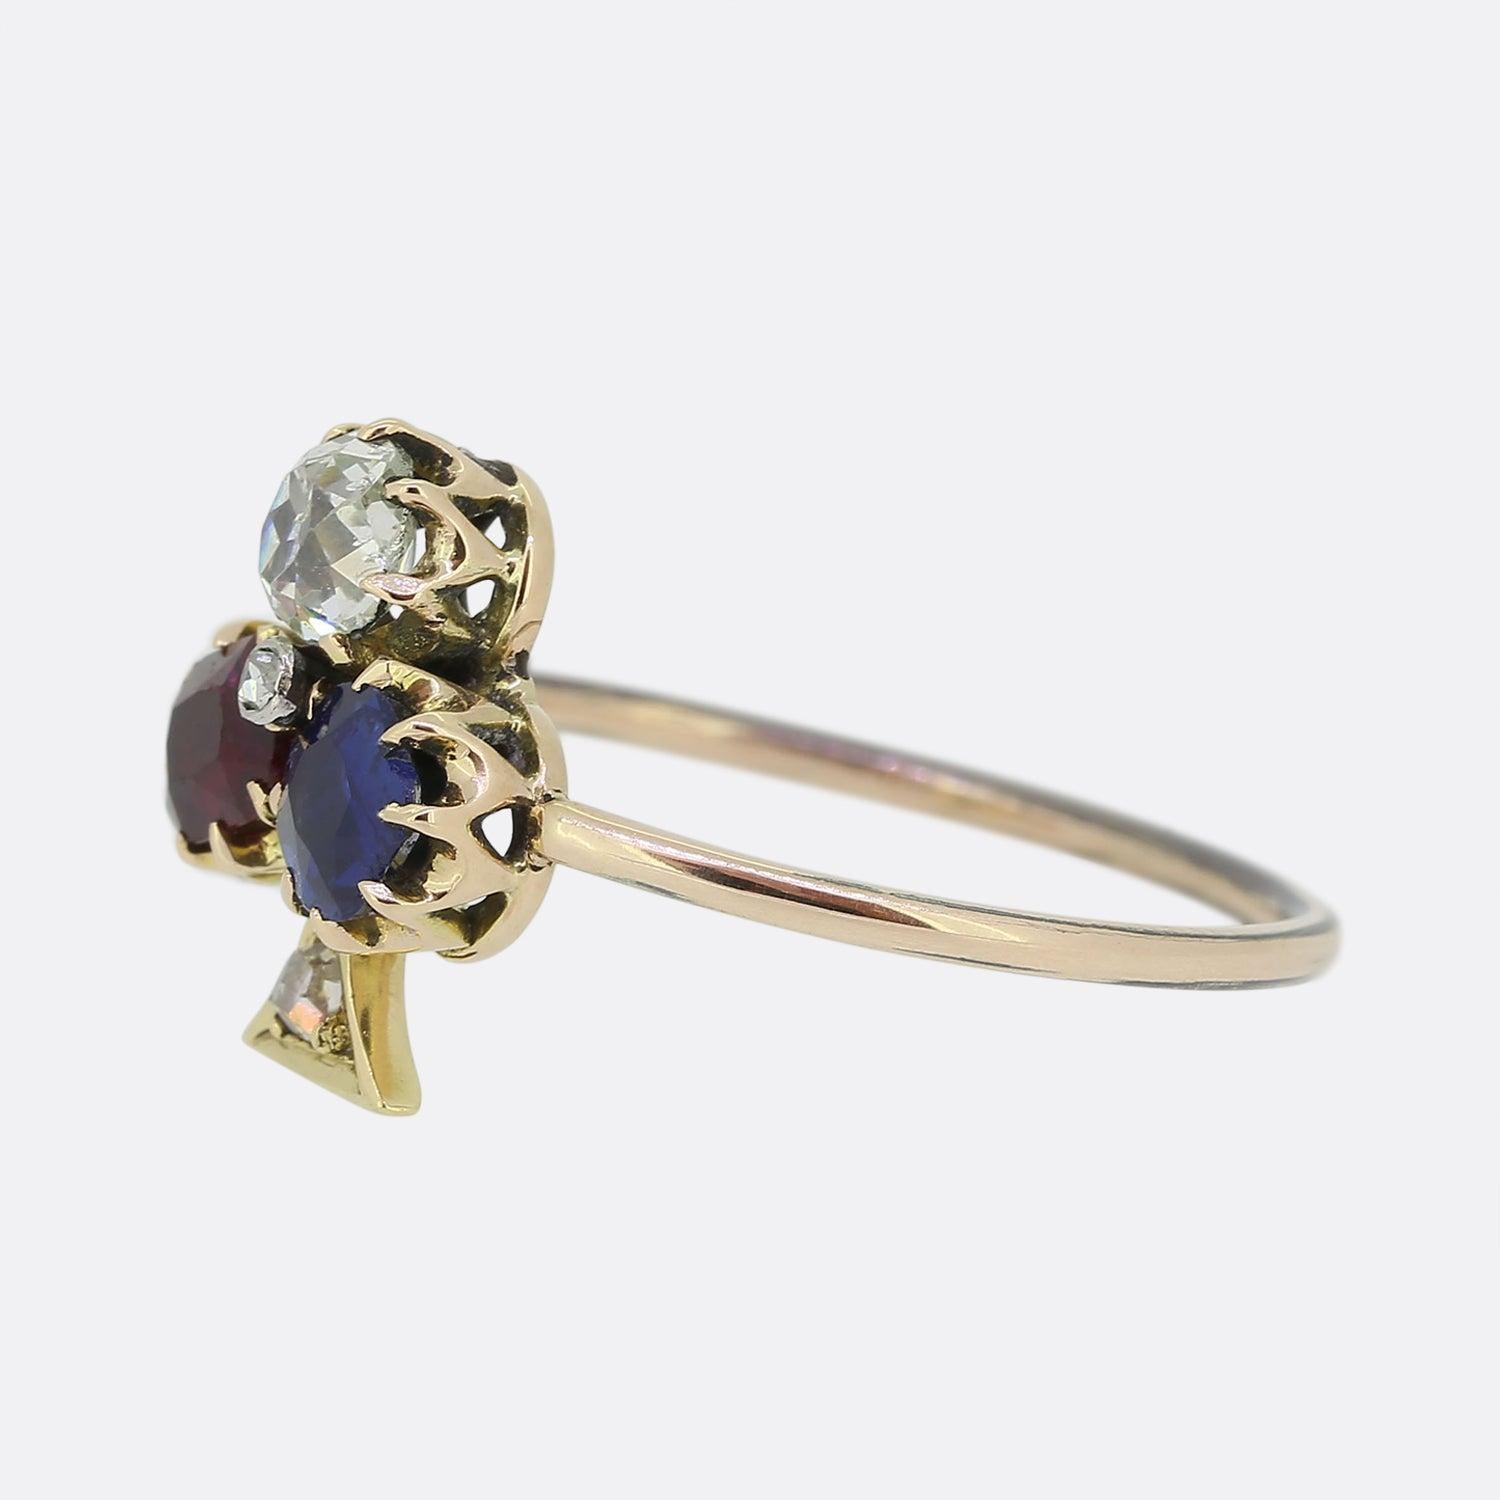 Here we have a charming Victorian clover ring. The ring is set with a trio of round gemstones including a ruby, sapphire and old cut diamond collectively forming the clover motif.  This delightful piece is then finished with a rose cut diamond